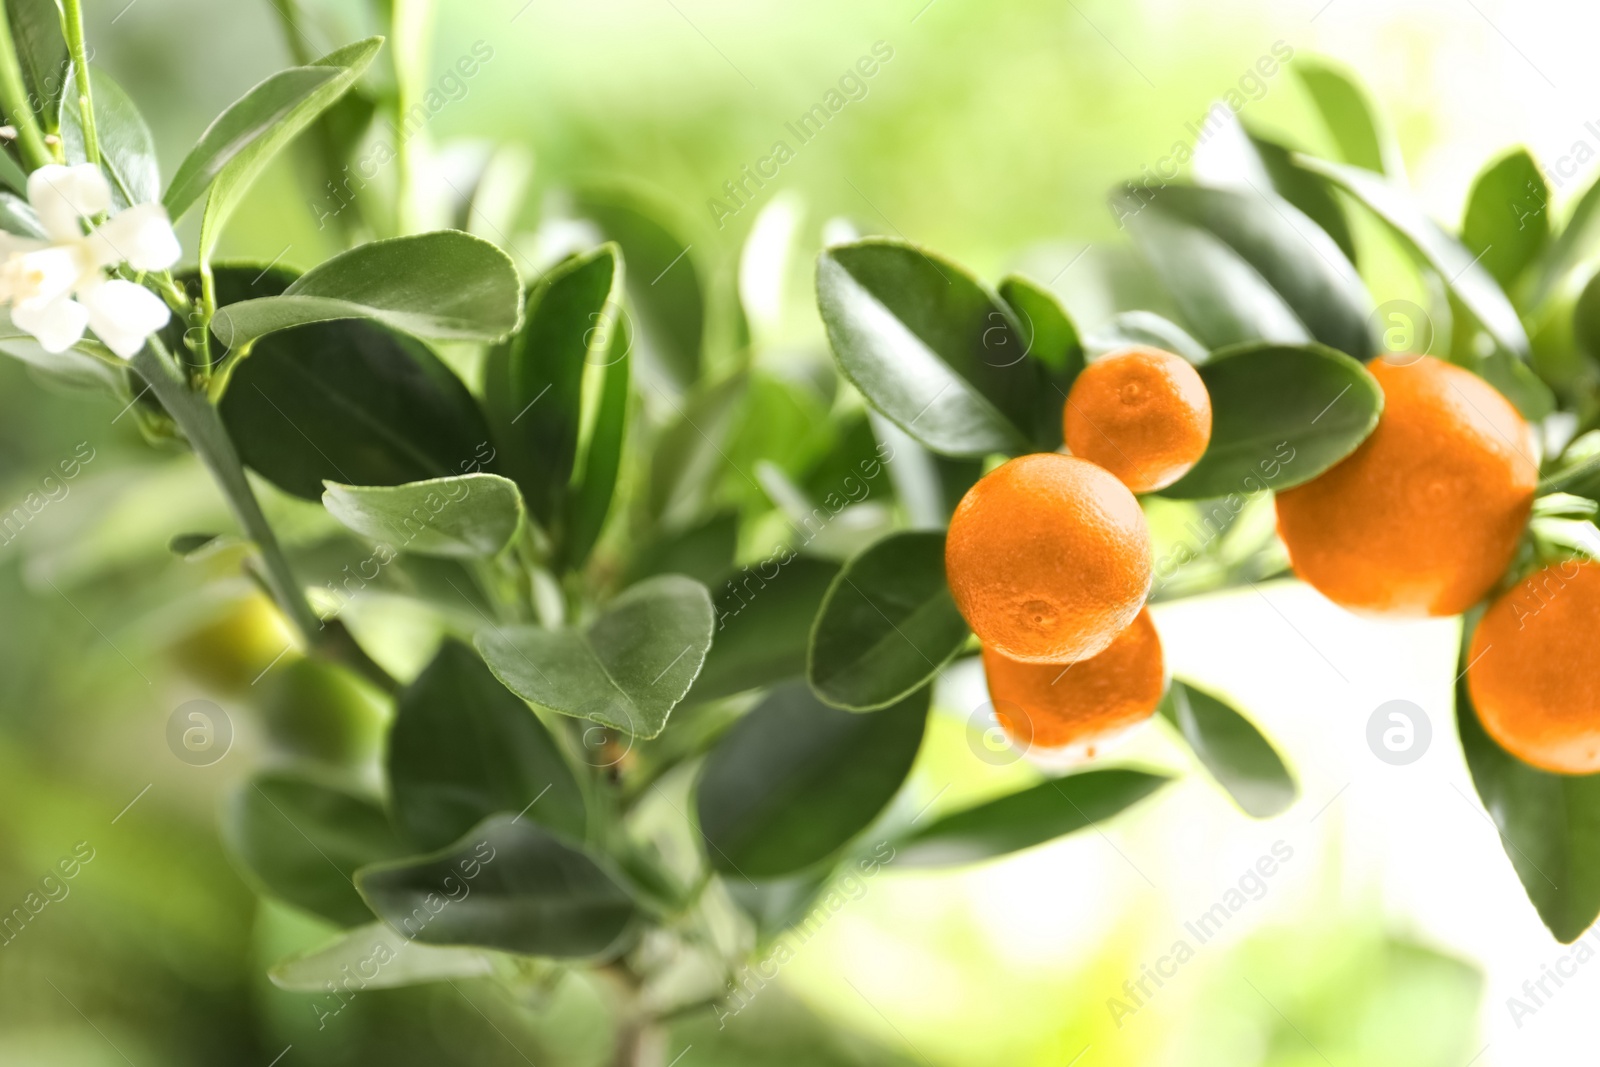 Photo of Citrus fruits on branch against blurred background. Space for text